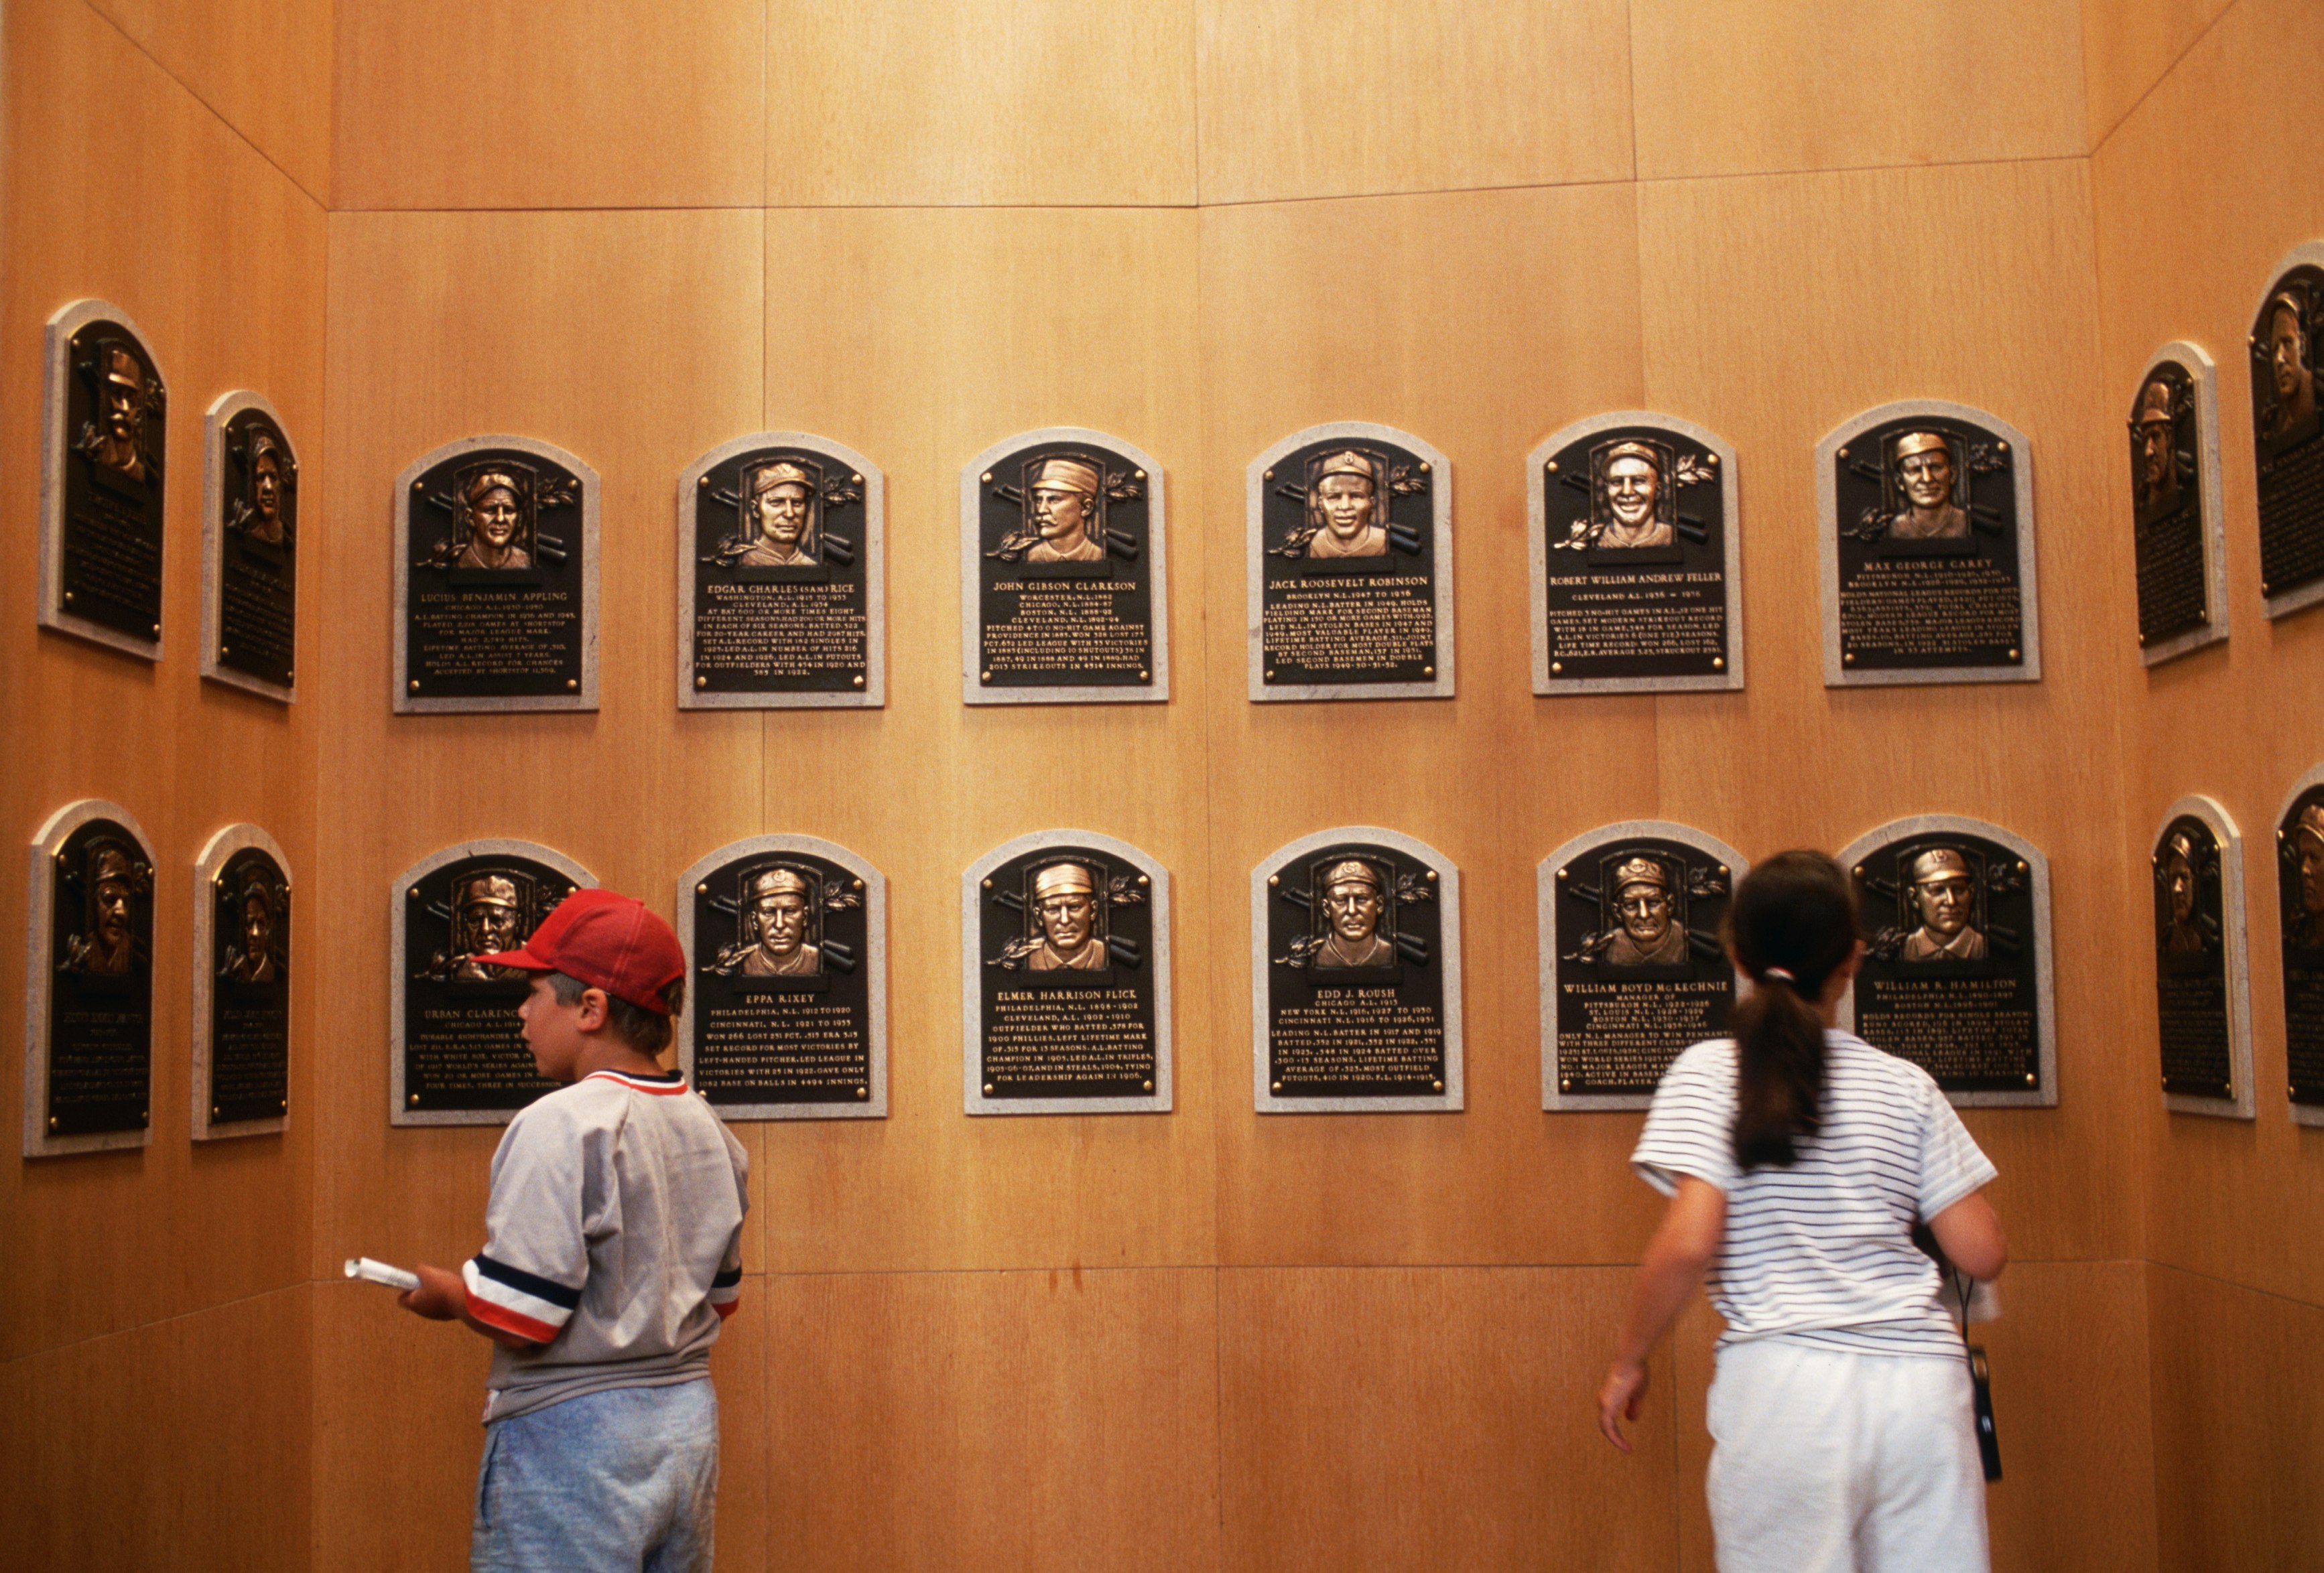 A young boy and girl look at name plaques of baseball players who have been inducted into the Baseball Hall of Fame